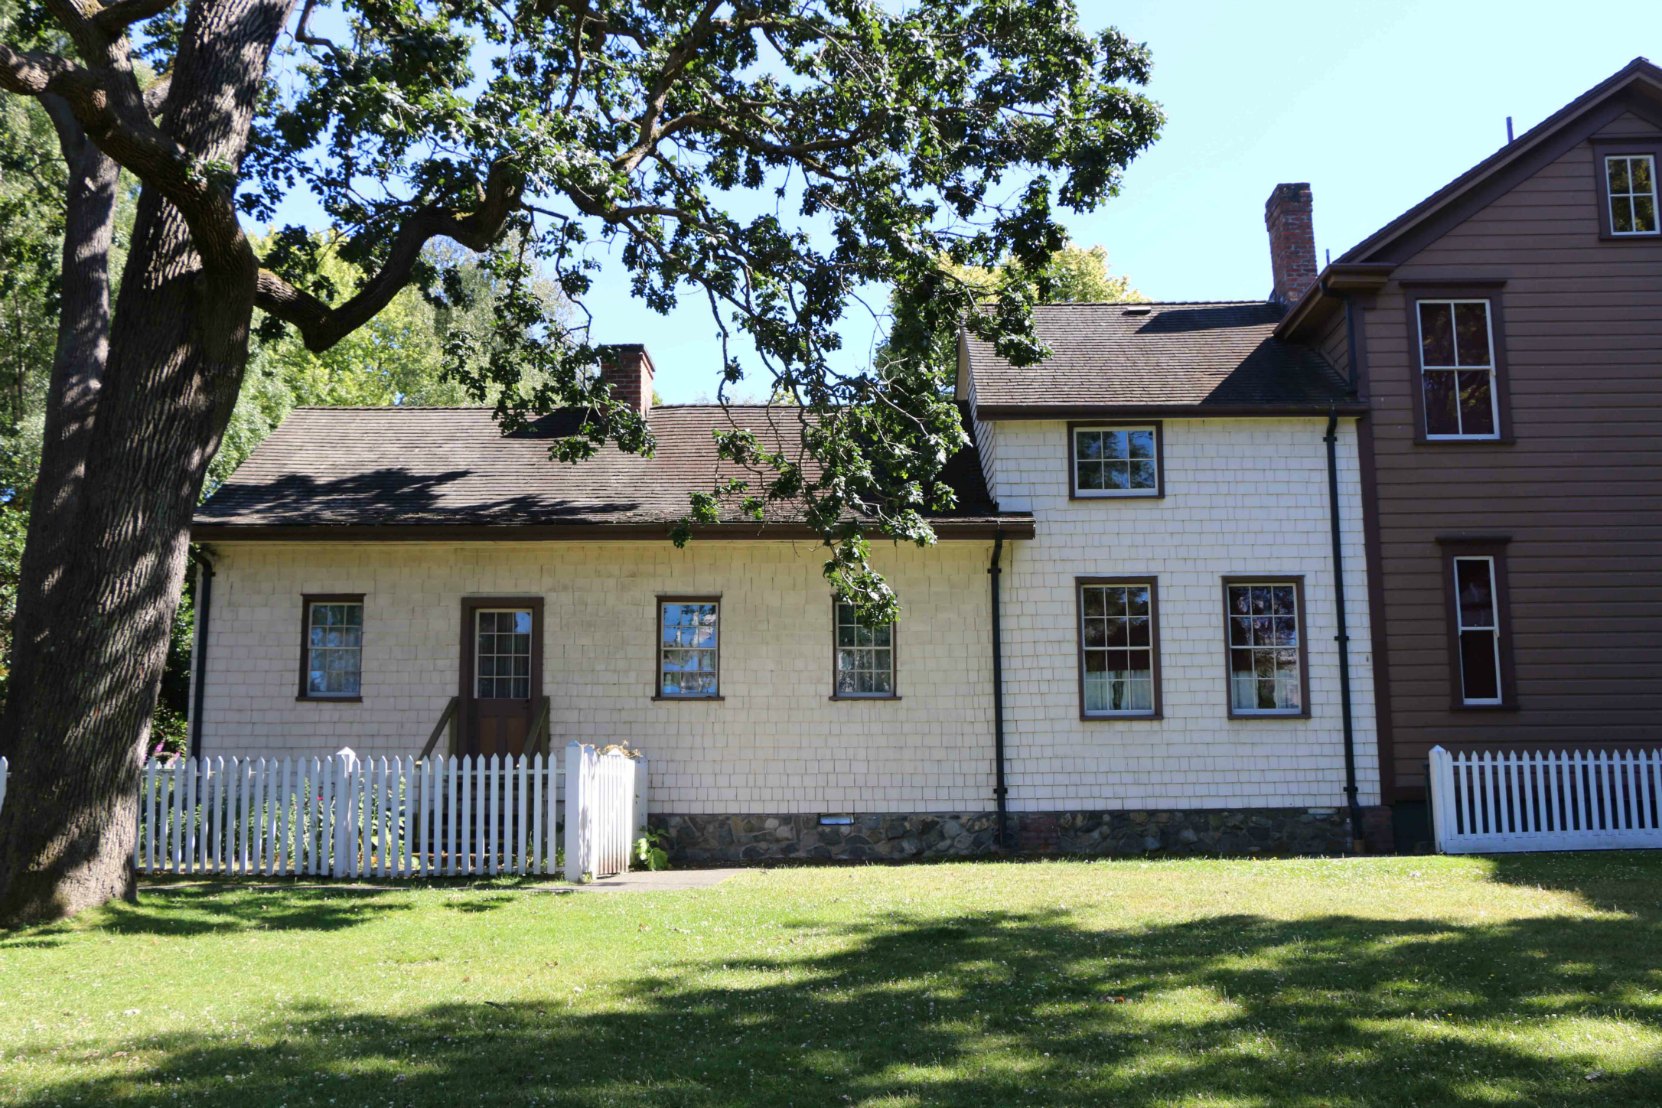 Helmcken House, the home of pioneer physician Dr. John Sebastian Helmcken, has been on the Thunderbird Park site since the 1860's (photo by Victoria Online Sightseeing Tours)